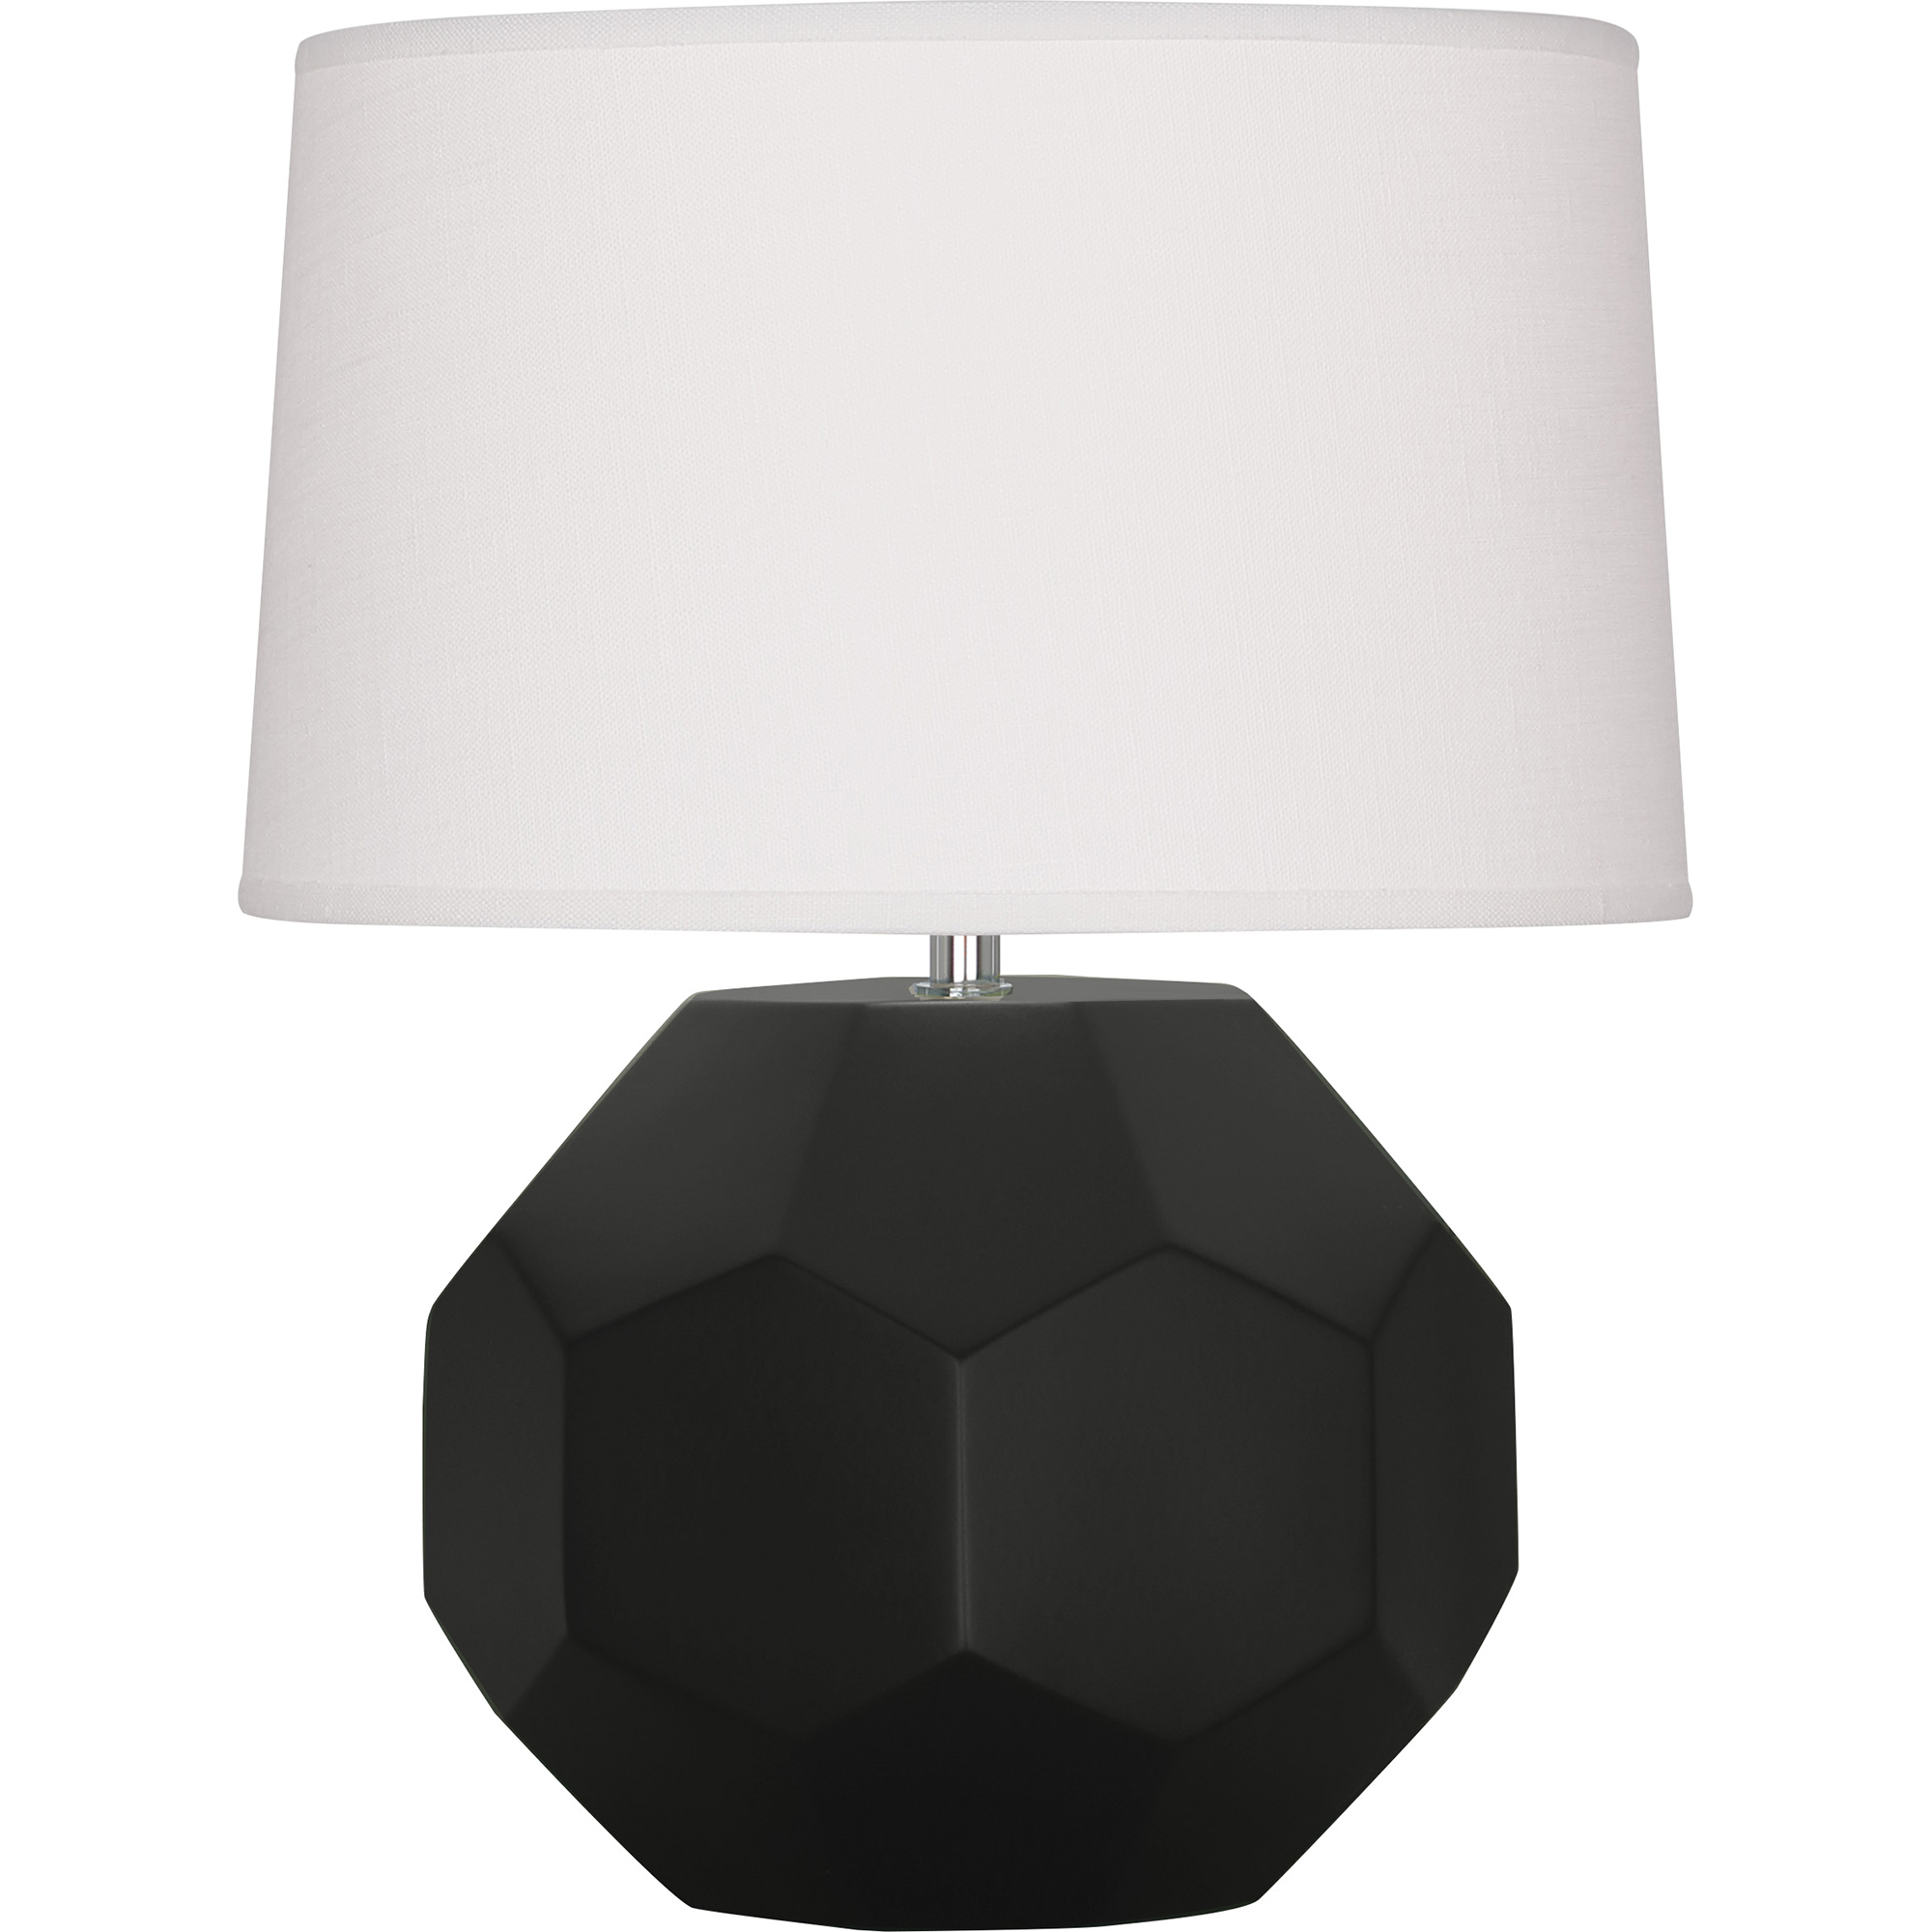 Franklin Accent Lamp Style #MOS02